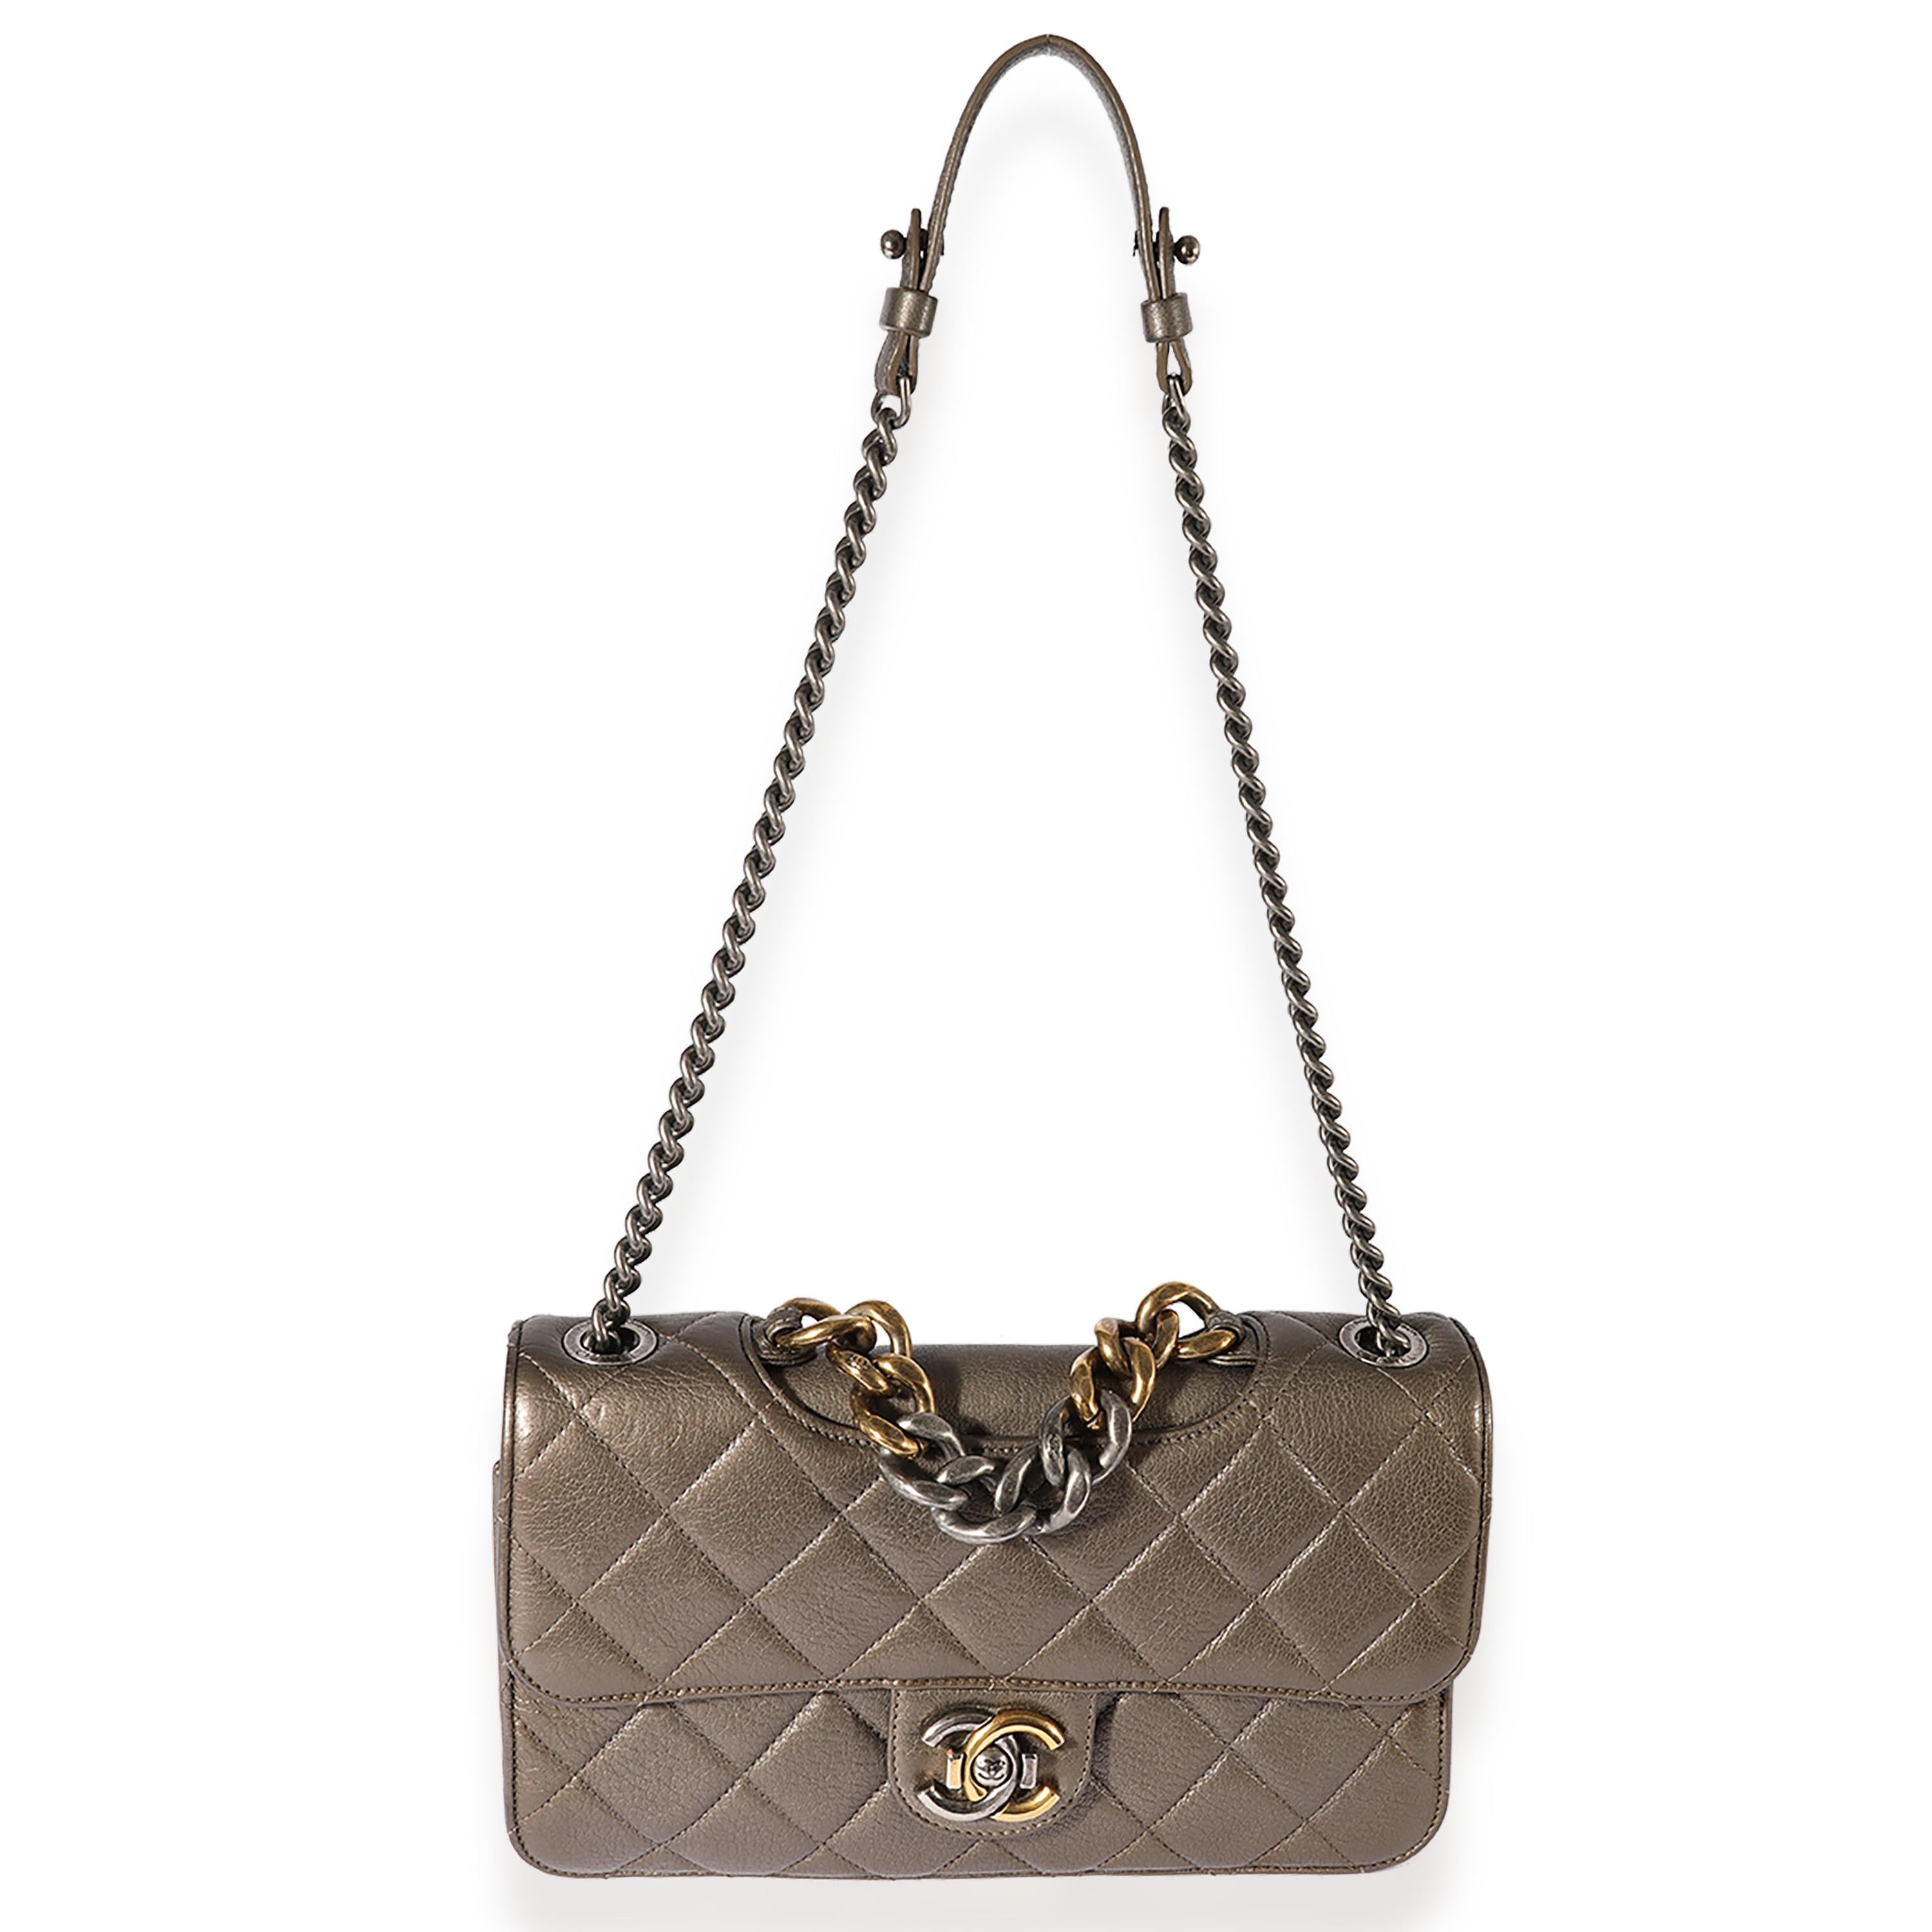 Listing Title: Chanel Pewter Quilted Leather Small Pondicherry Flap Bag
SKU: 122955
MSRP: 3200.00
Condition: Pre-owned 
Handbag Condition: Very Good
Condition Comments: Very Good Condition. Plastic a some hardware. Scuffing at corners. Scratching at